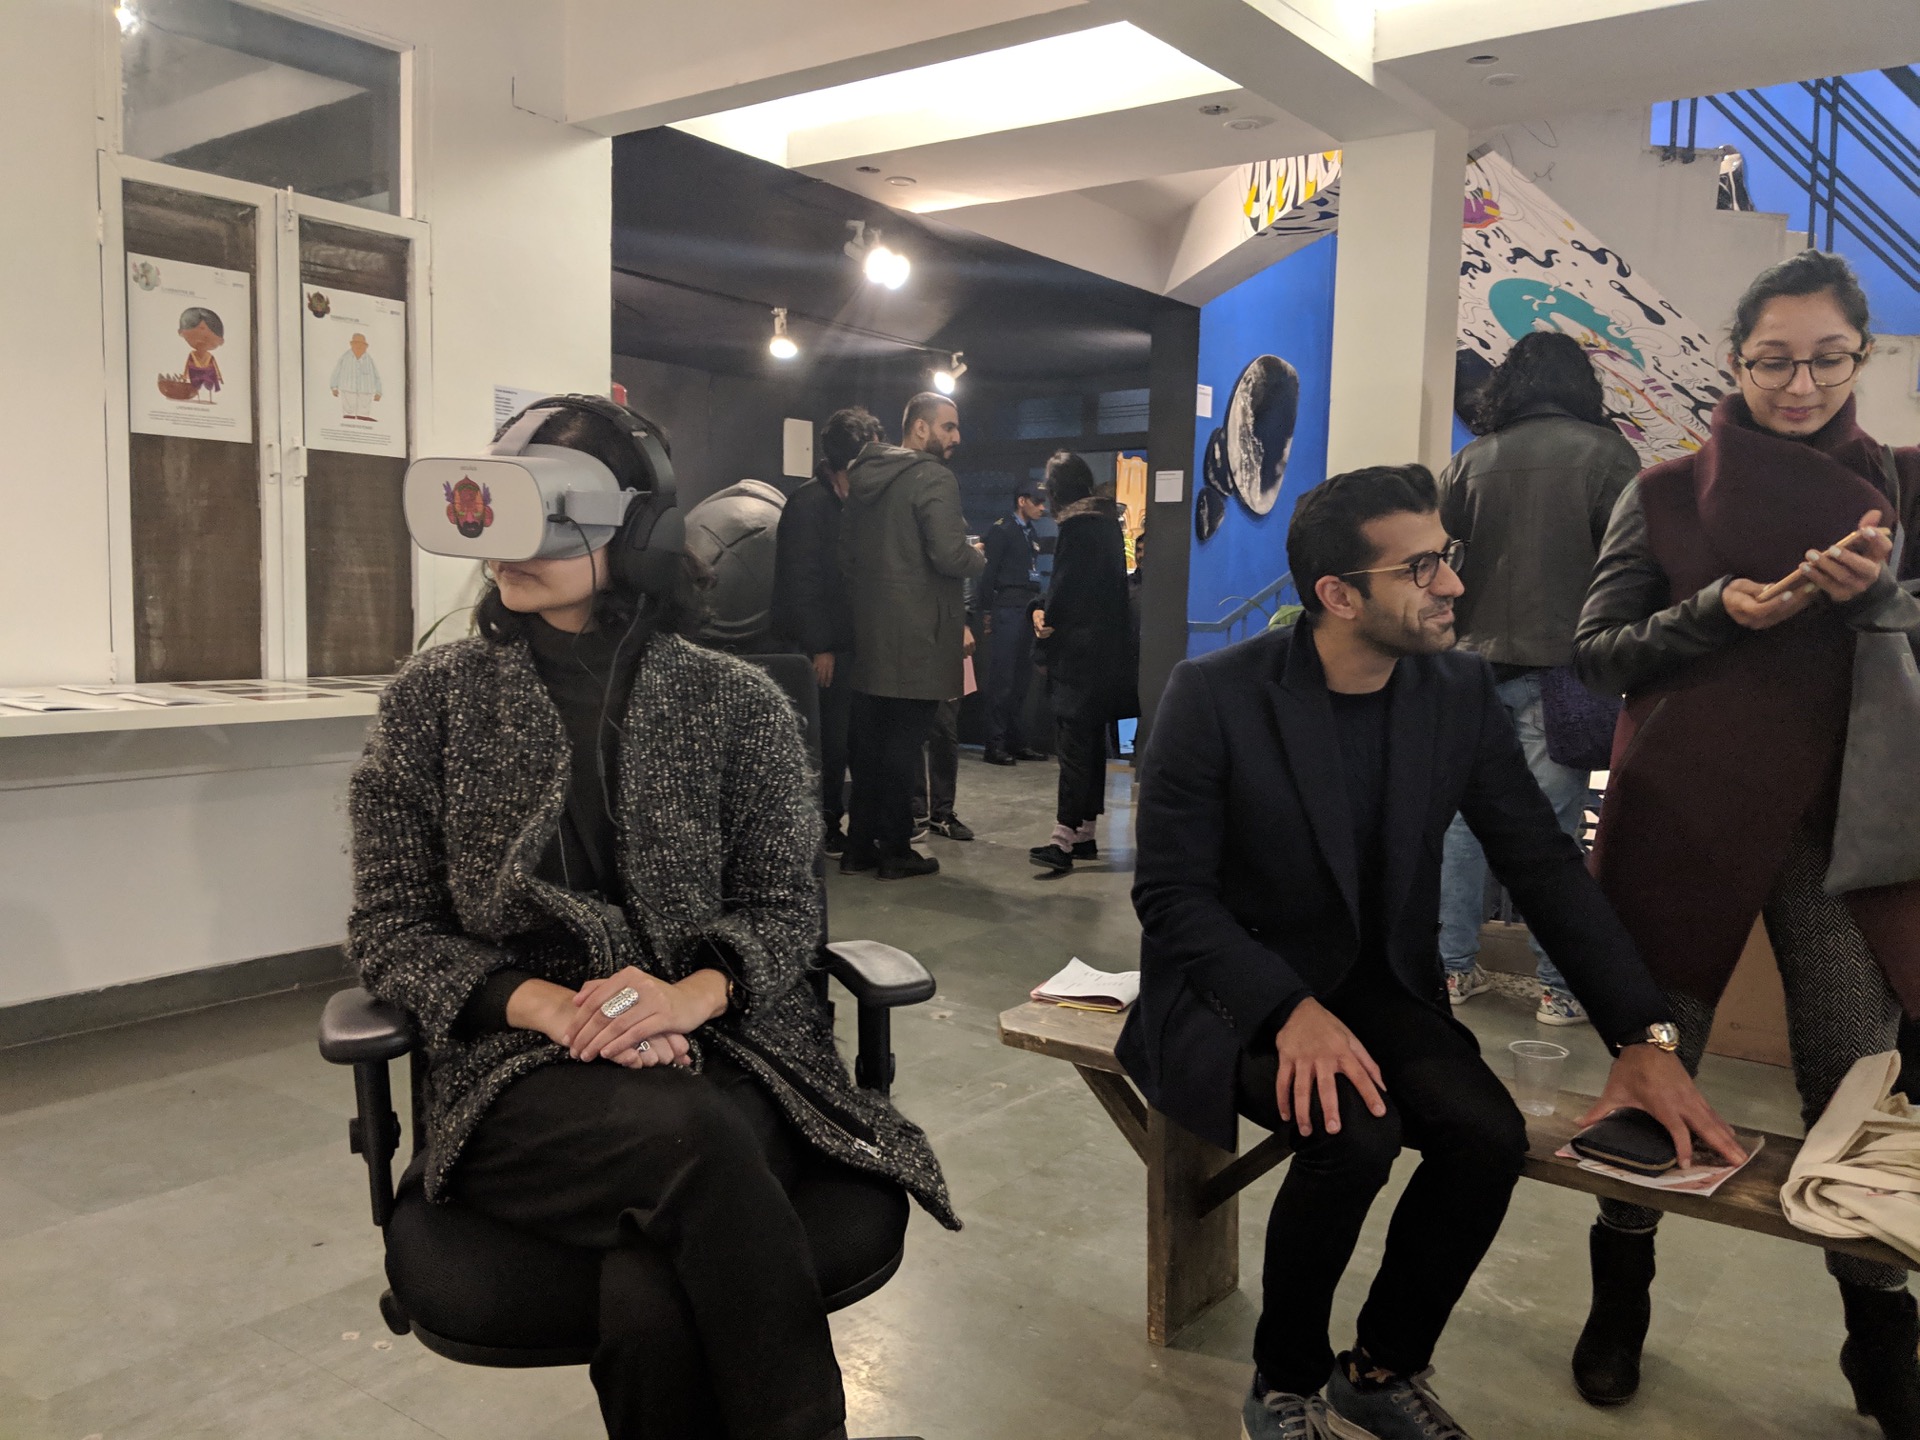 On display at The Irregulars Art Fair, Delhi. Yes, the food is just as good in VR